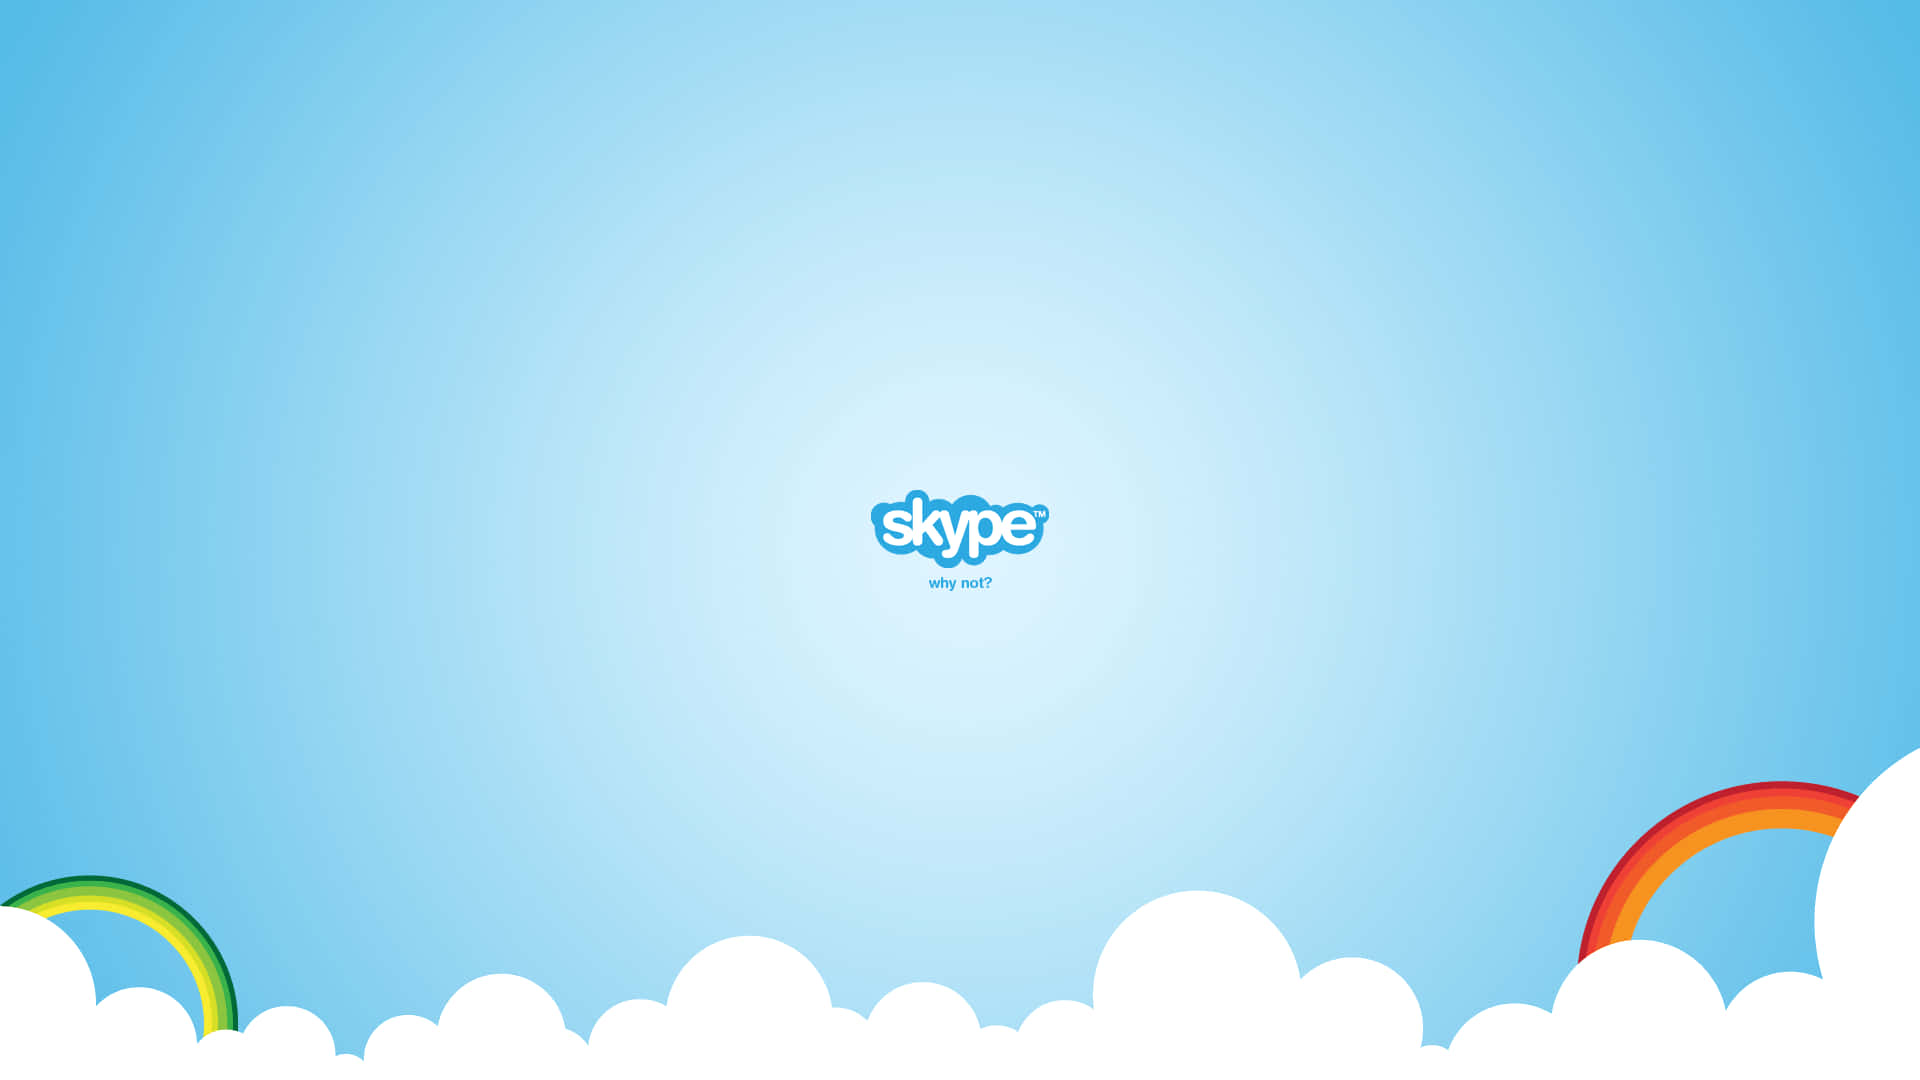 Stay connected with Skype